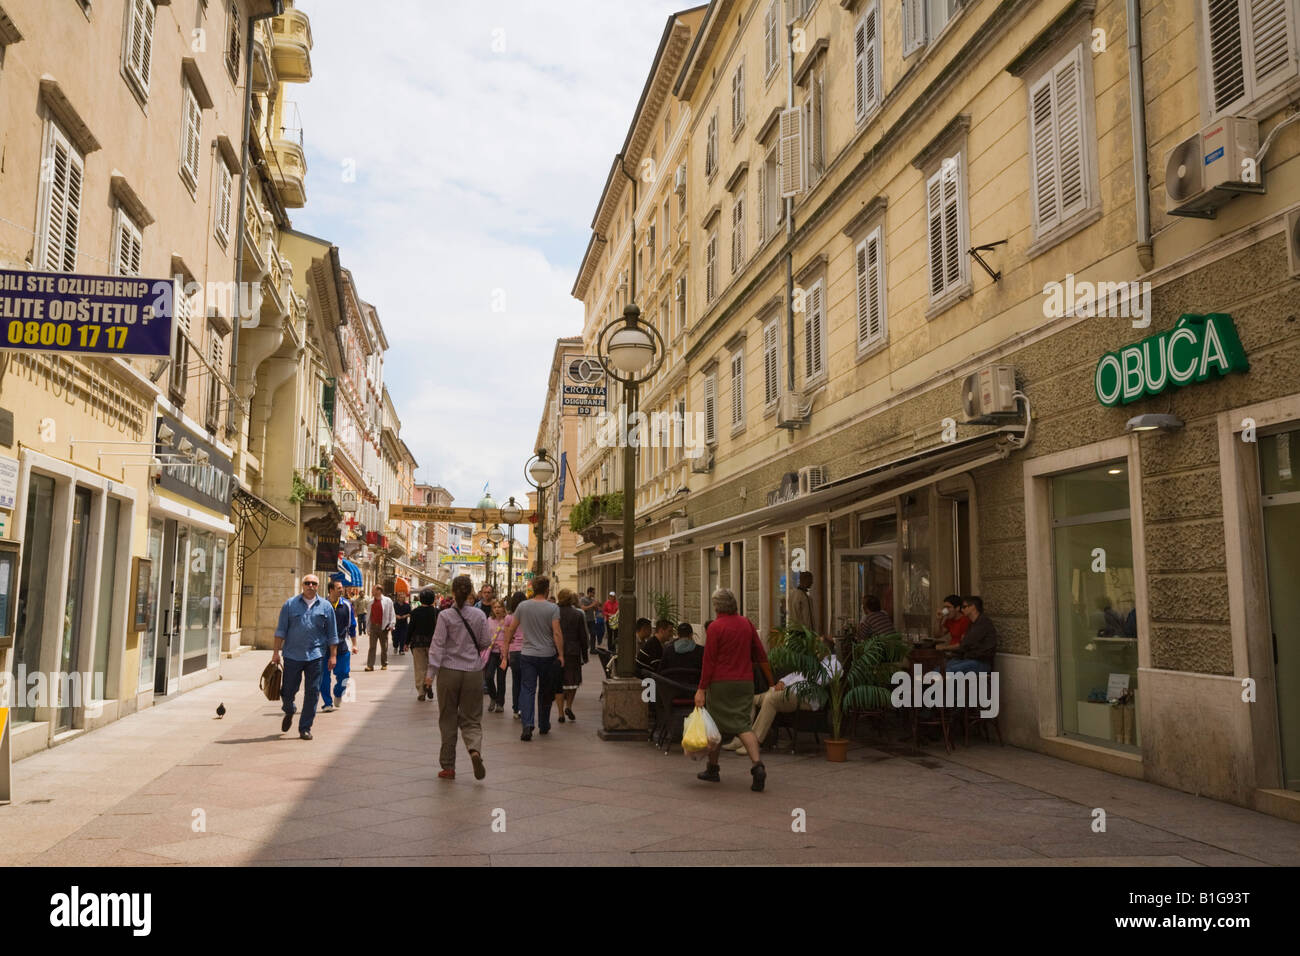 Rijeka Croatia Europe Shops cafe and buildings in pedestrianised Korzo Street busy with people in town centre Stock Photo